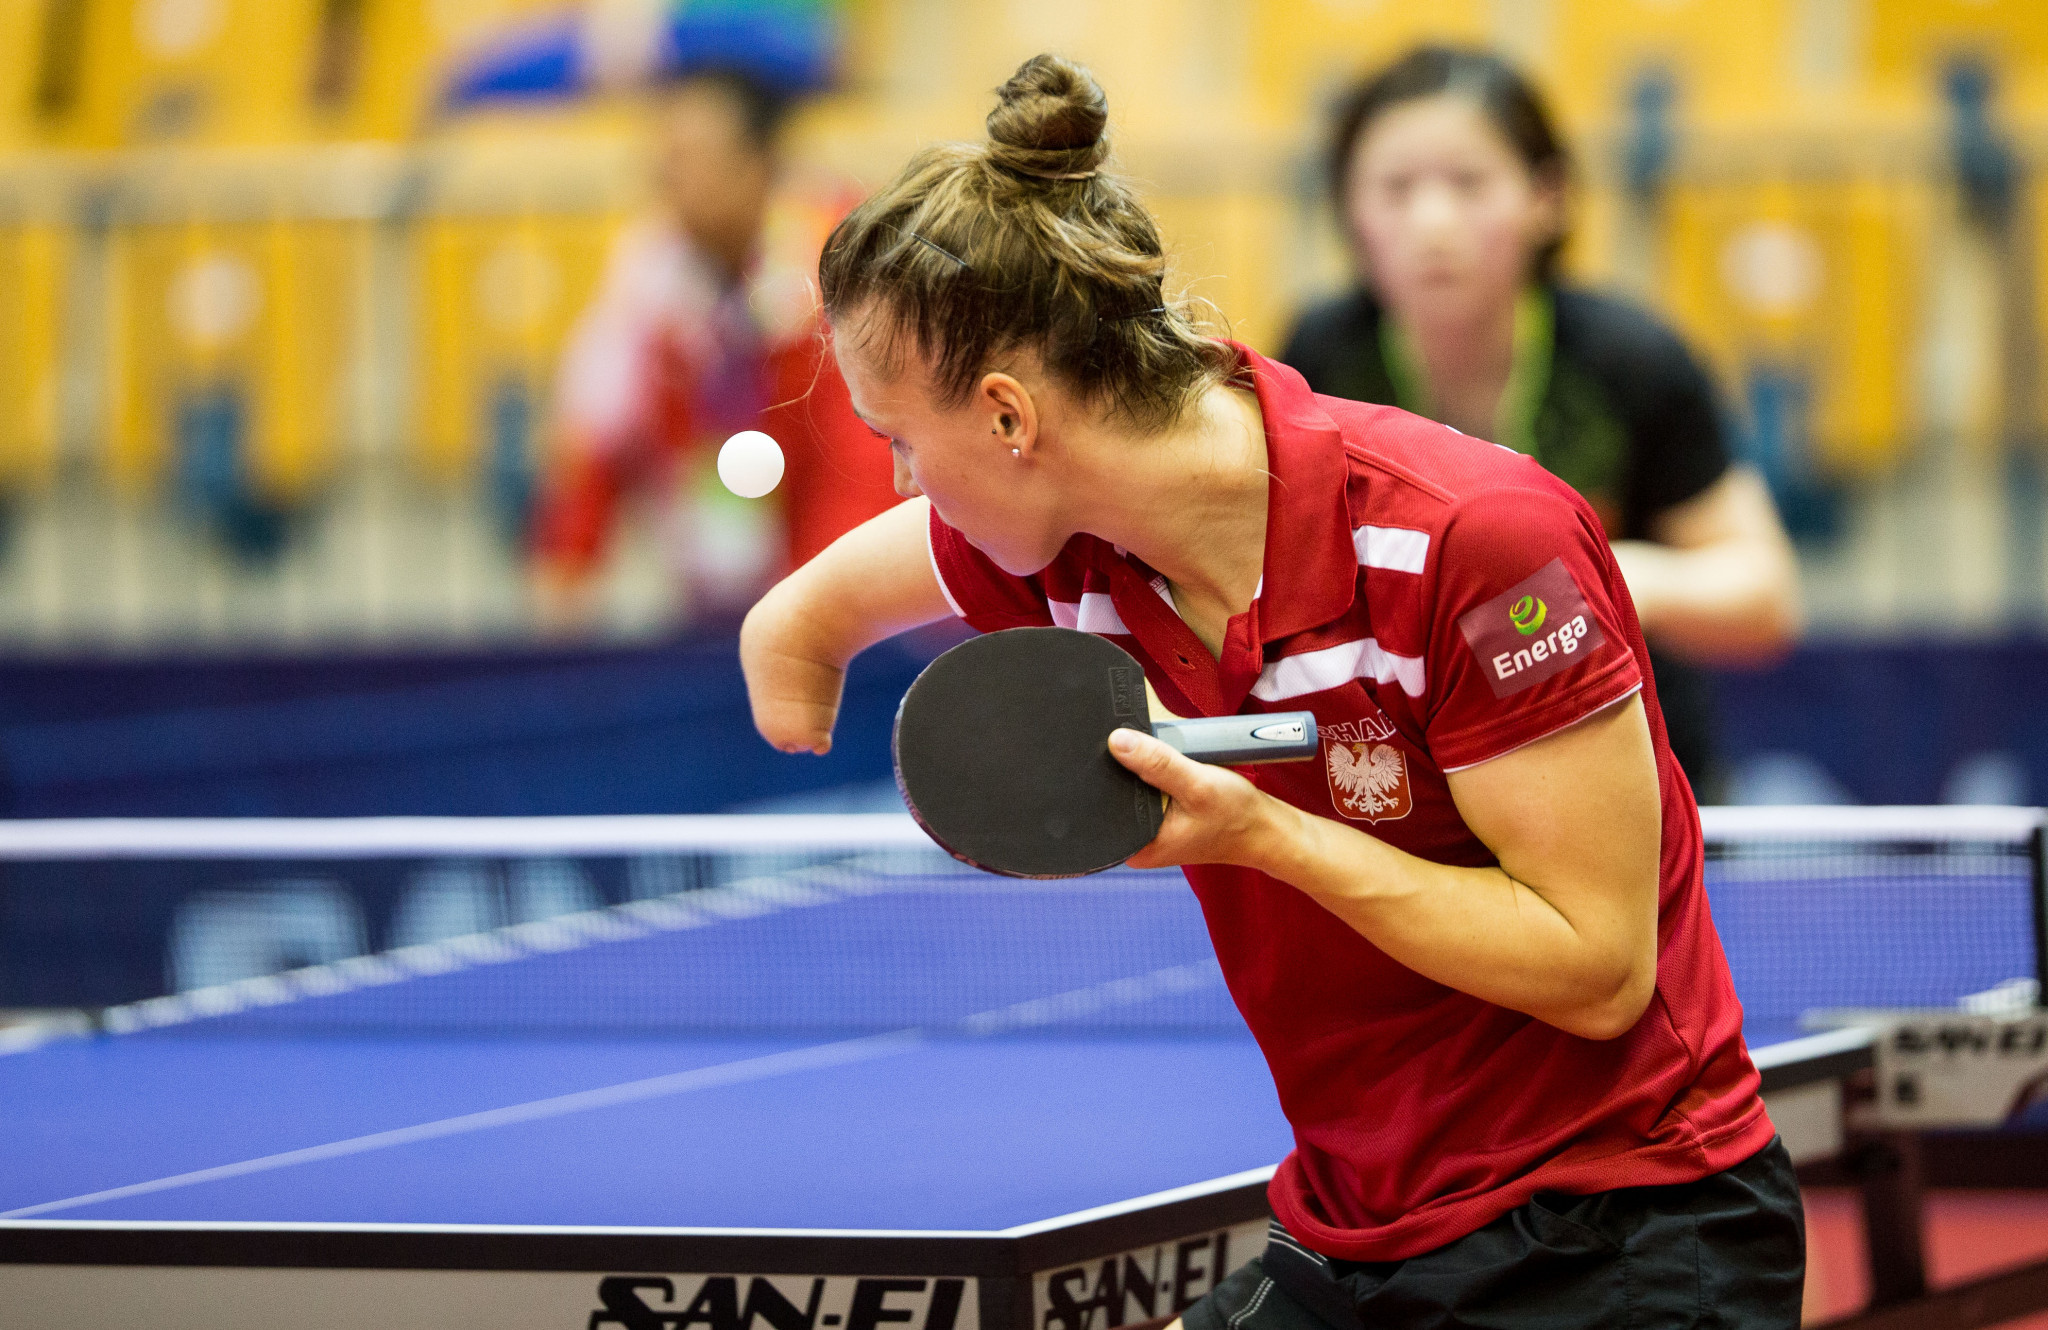 The ITTF Para Table Tennis Tour will have a ball sponsor, Chinese sports equipment supplier 729, for the first time ©ITTF